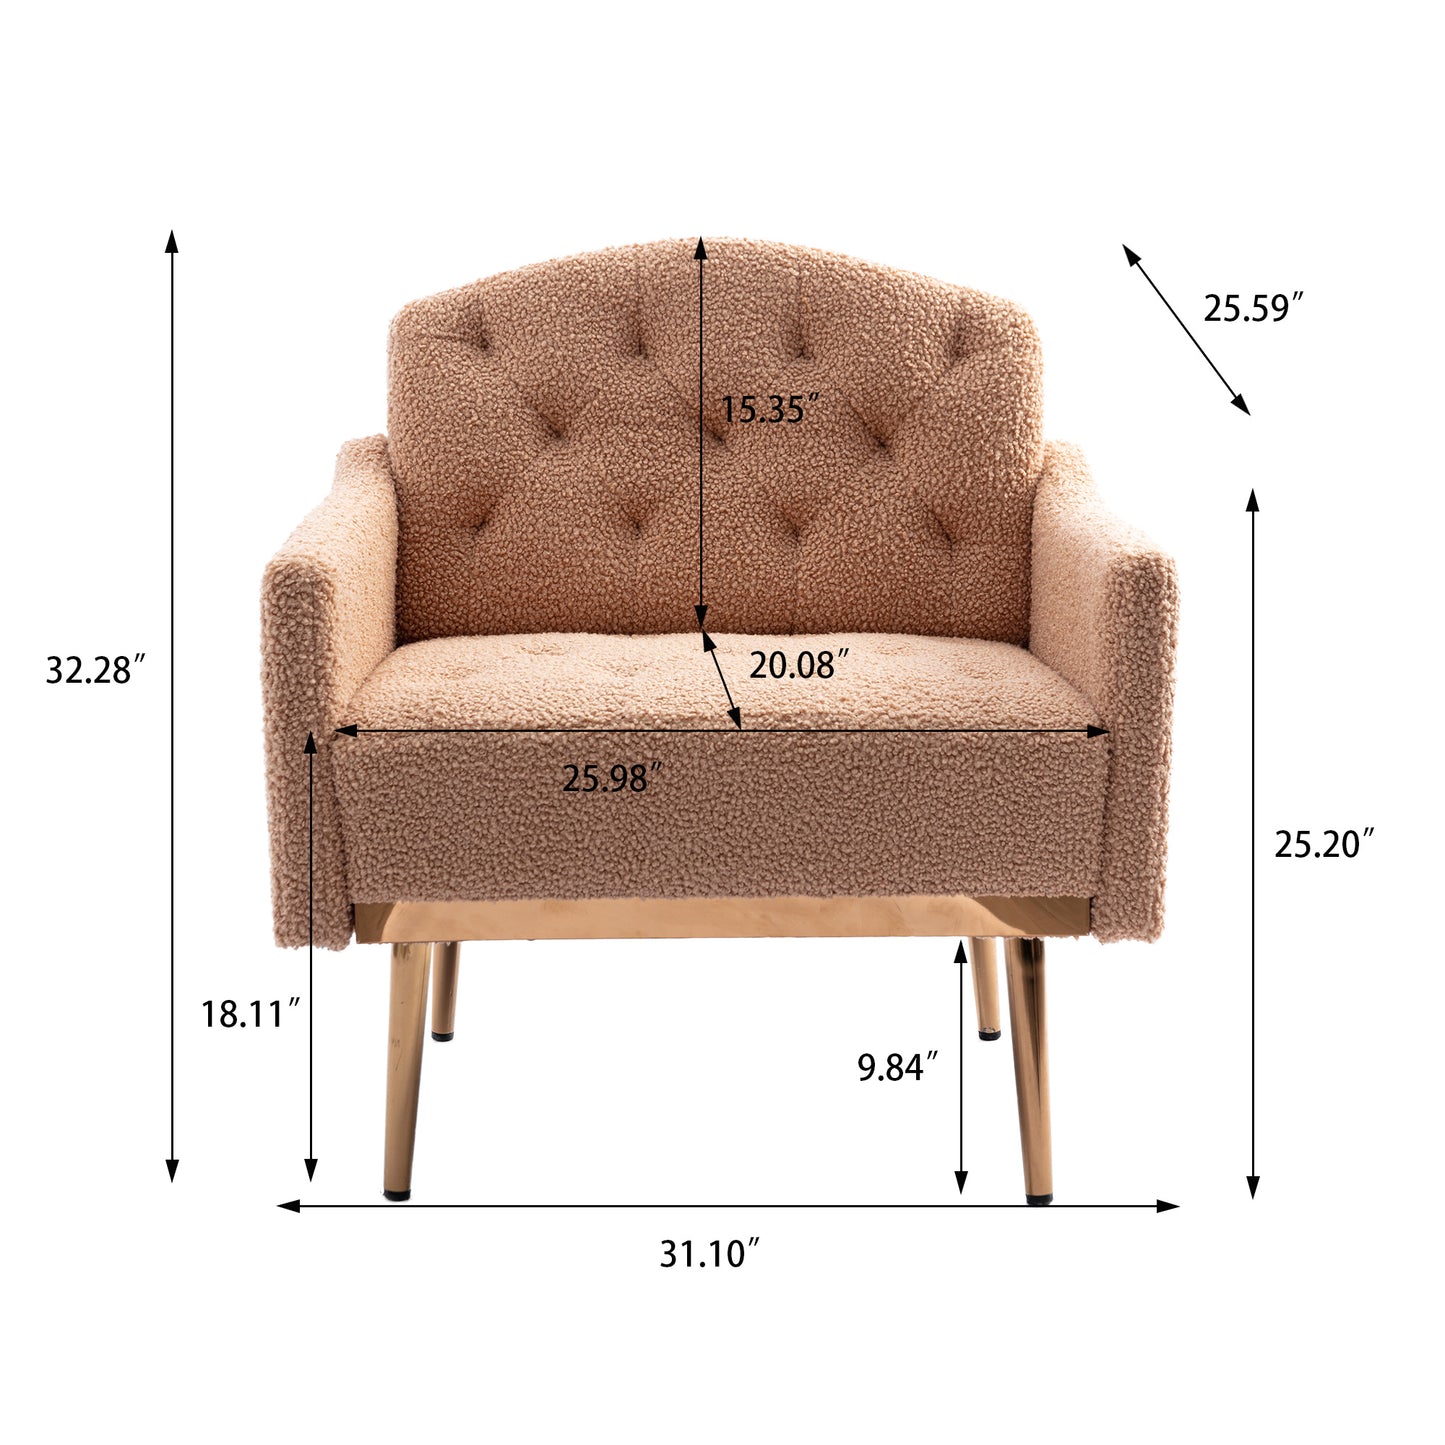 Accent Chair ,leisure single sofa with Rose Golden feet